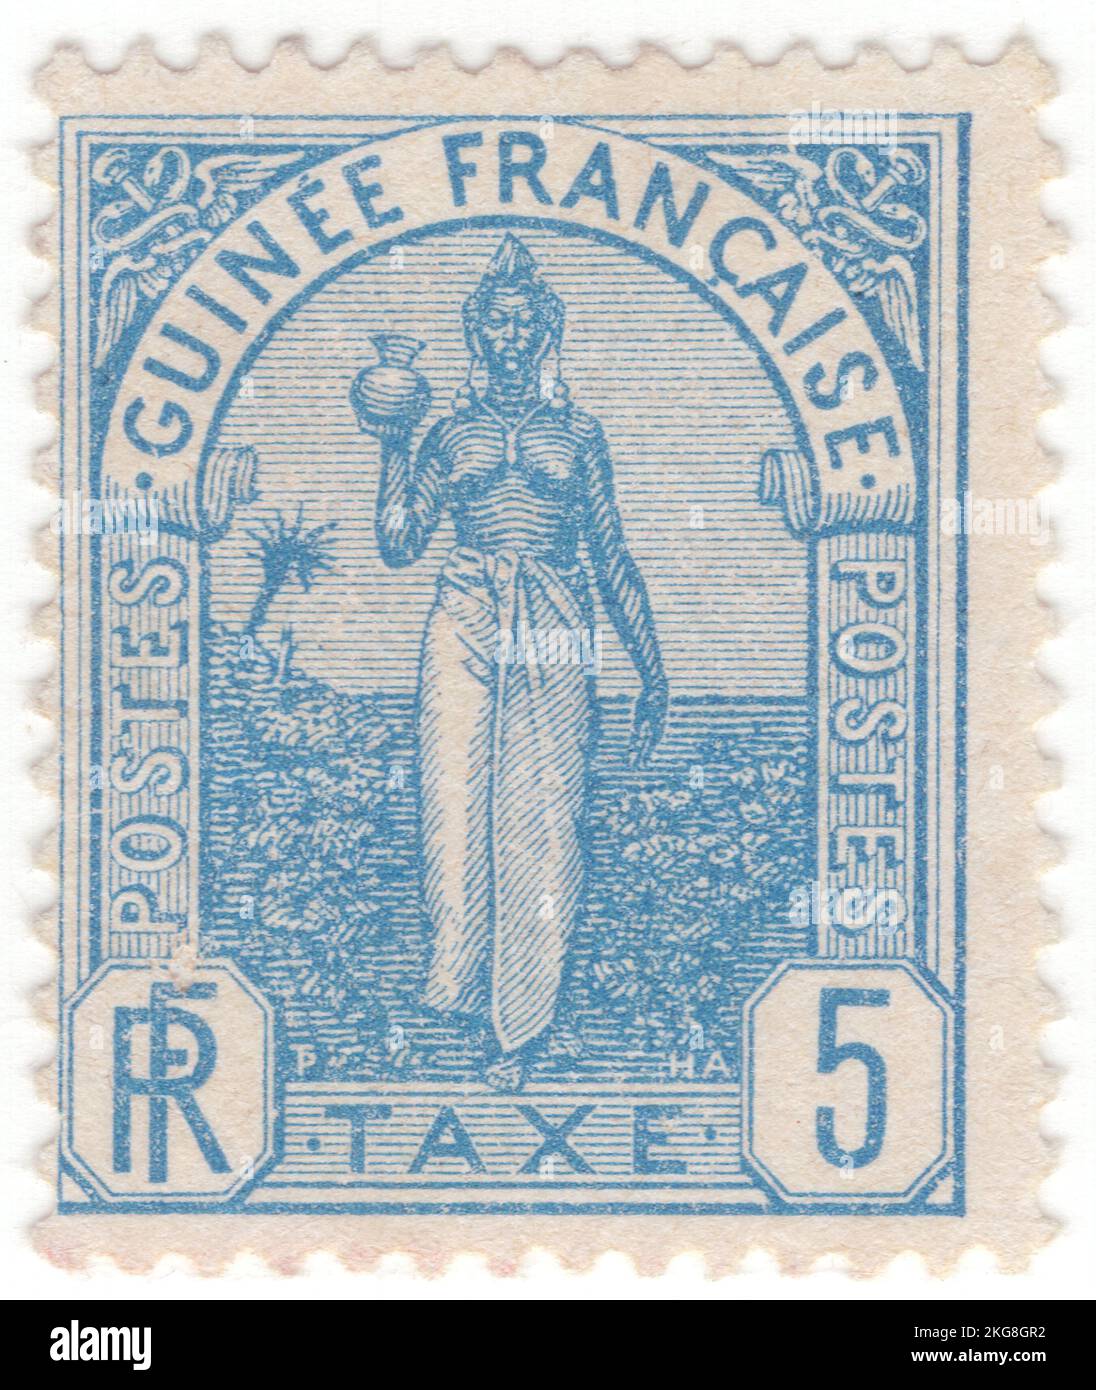 FRENCH GUINEA - 1905: An 5 centimes blue Postage Due stamp depicting portrait of Fulah Woman. The Fula, Fulani, or Fulah people are one of the largest ethnic groups in the Sahel and West Africa, widely dispersed across the region. Inhabiting many countries, they live mainly in West Africa and northern parts of Central Africa, South Sudan, Darfur, and regions near the Red Sea coast in Sudan. The approximate number of Fula people is unknown due to clashing definitions regarding Fula ethnicity. Various estimates put the figure between 25 and 40 million people worldwide Stock Photo